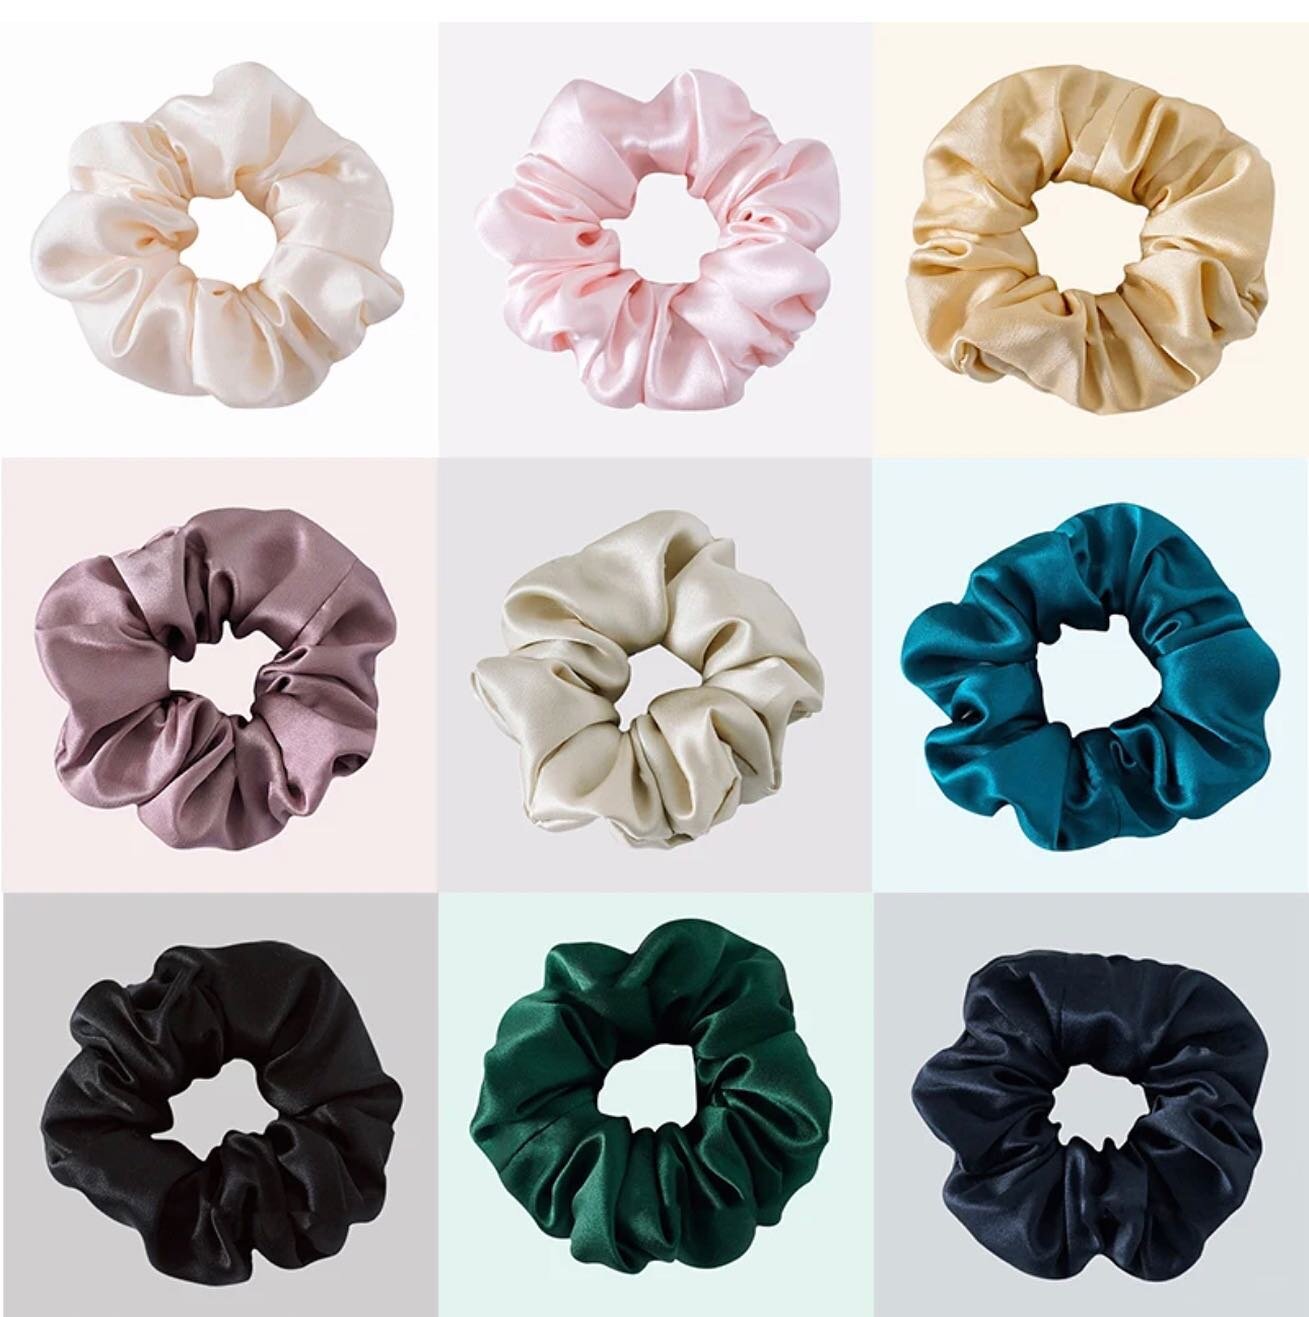 Did you know that We got clips and Scrunchies? Many different colors! Swing by and see what you can find! #scrunchies #clawclips